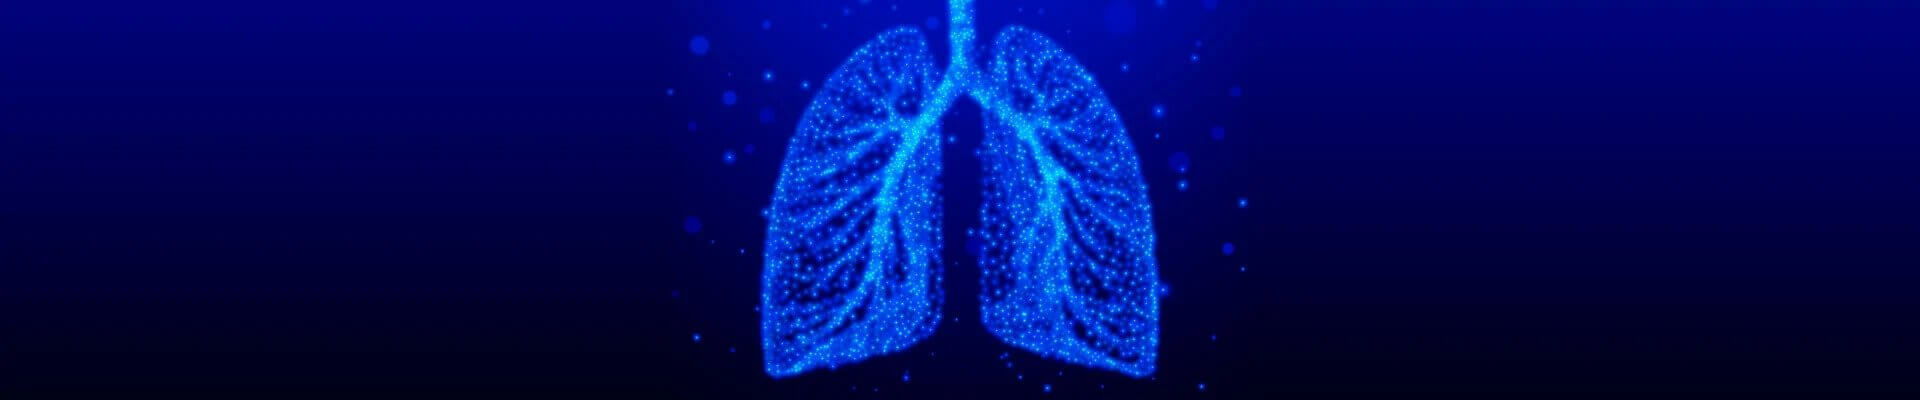 GW_InnerBannerImages_Respiratory (1)